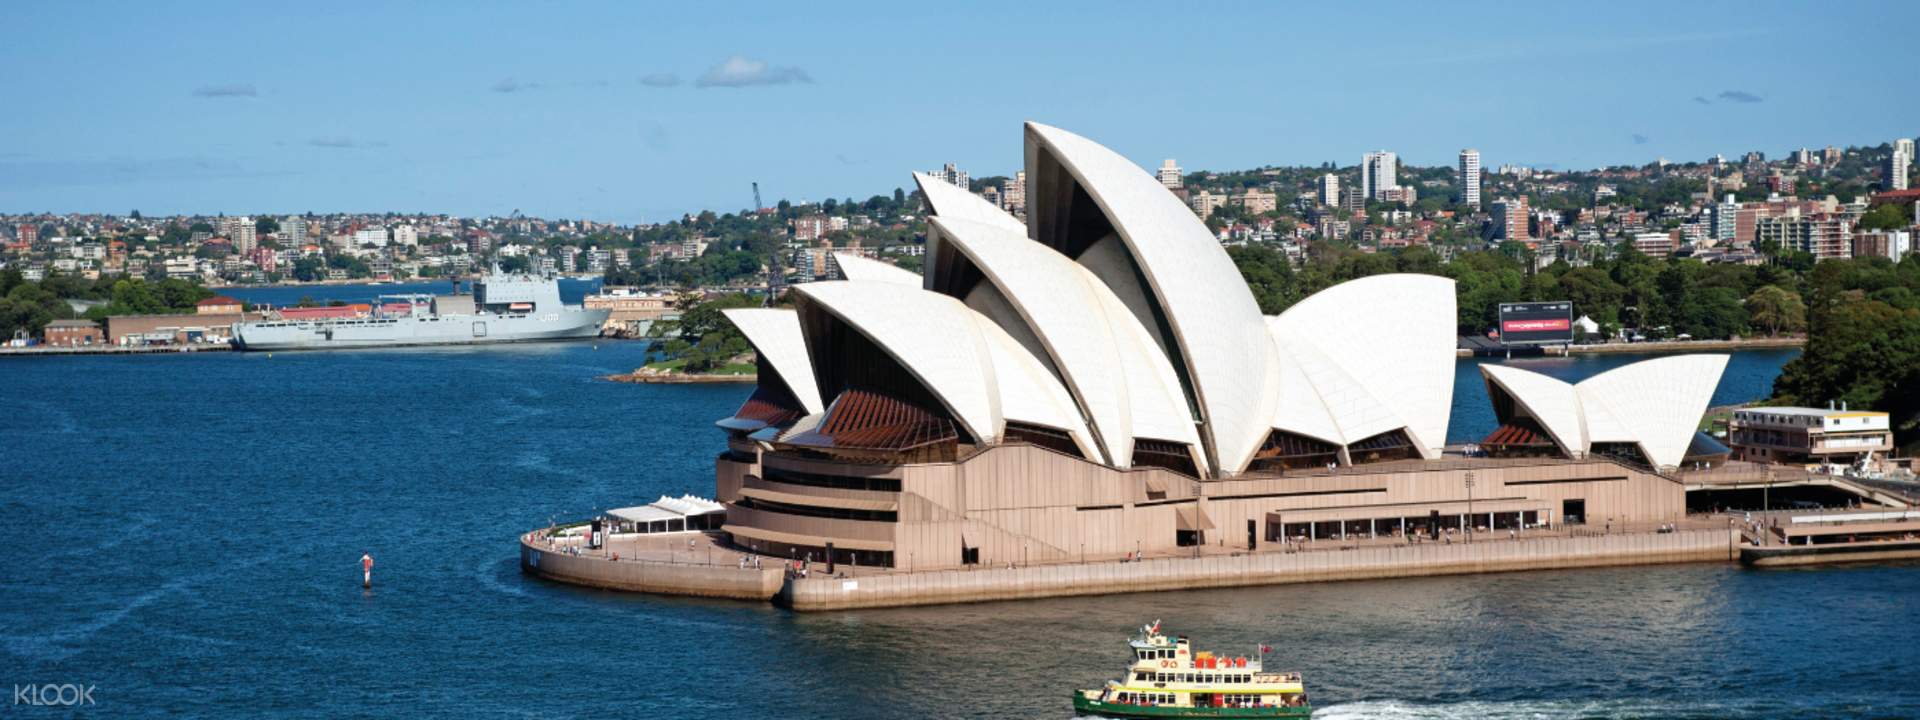 guided tours from sydney